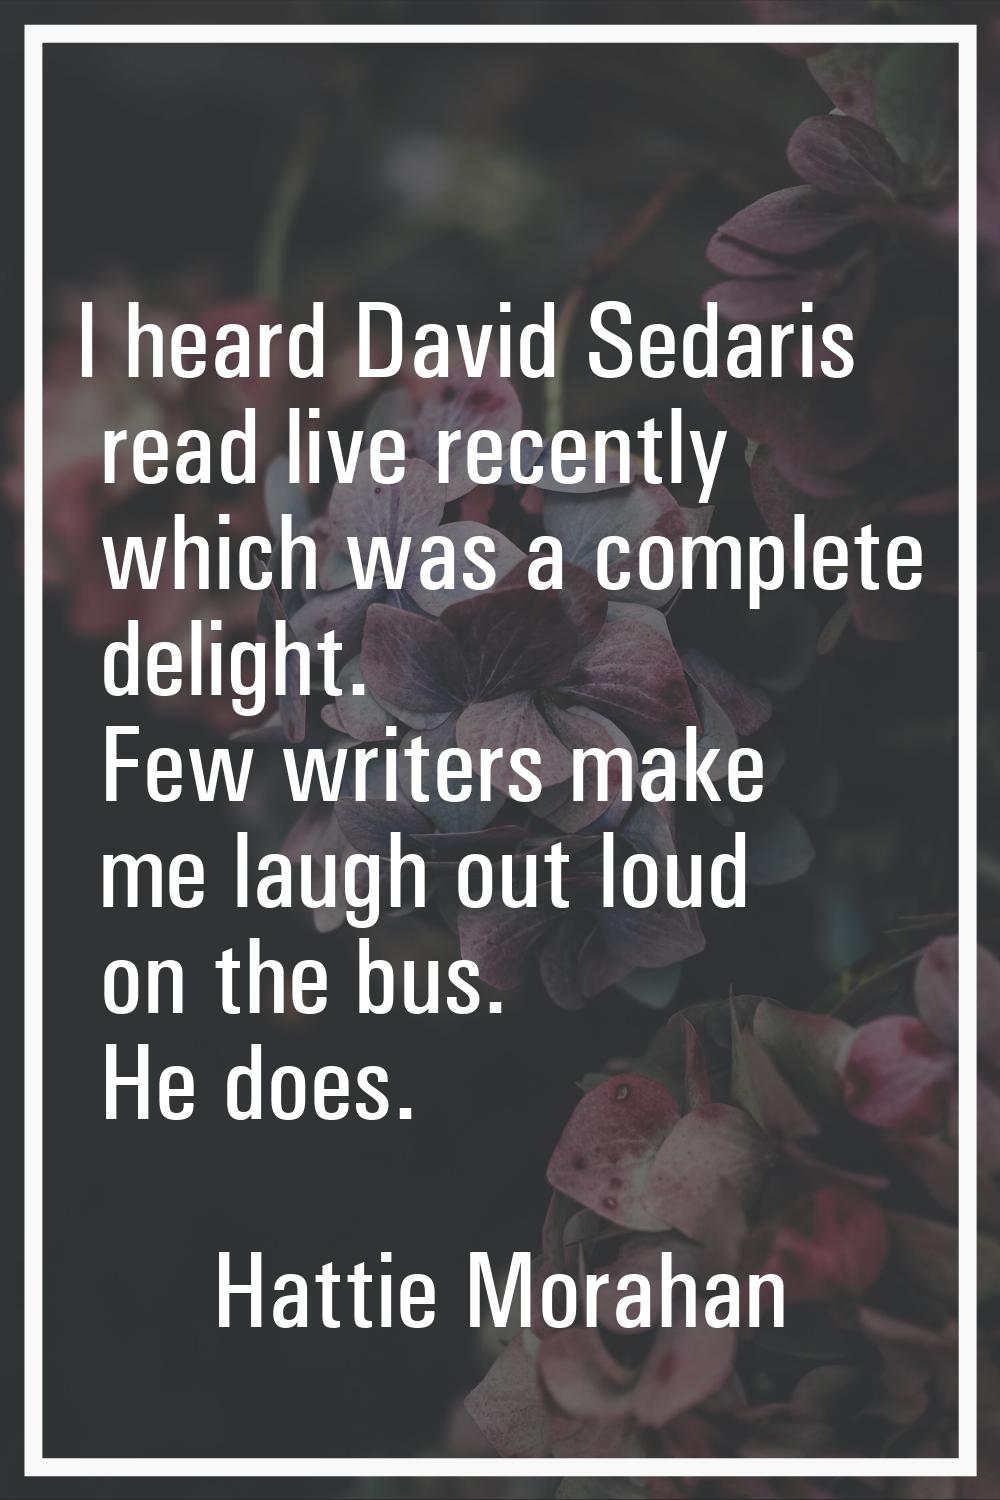 I heard David Sedaris read live recently which was a complete delight. Few writers make me laugh ou